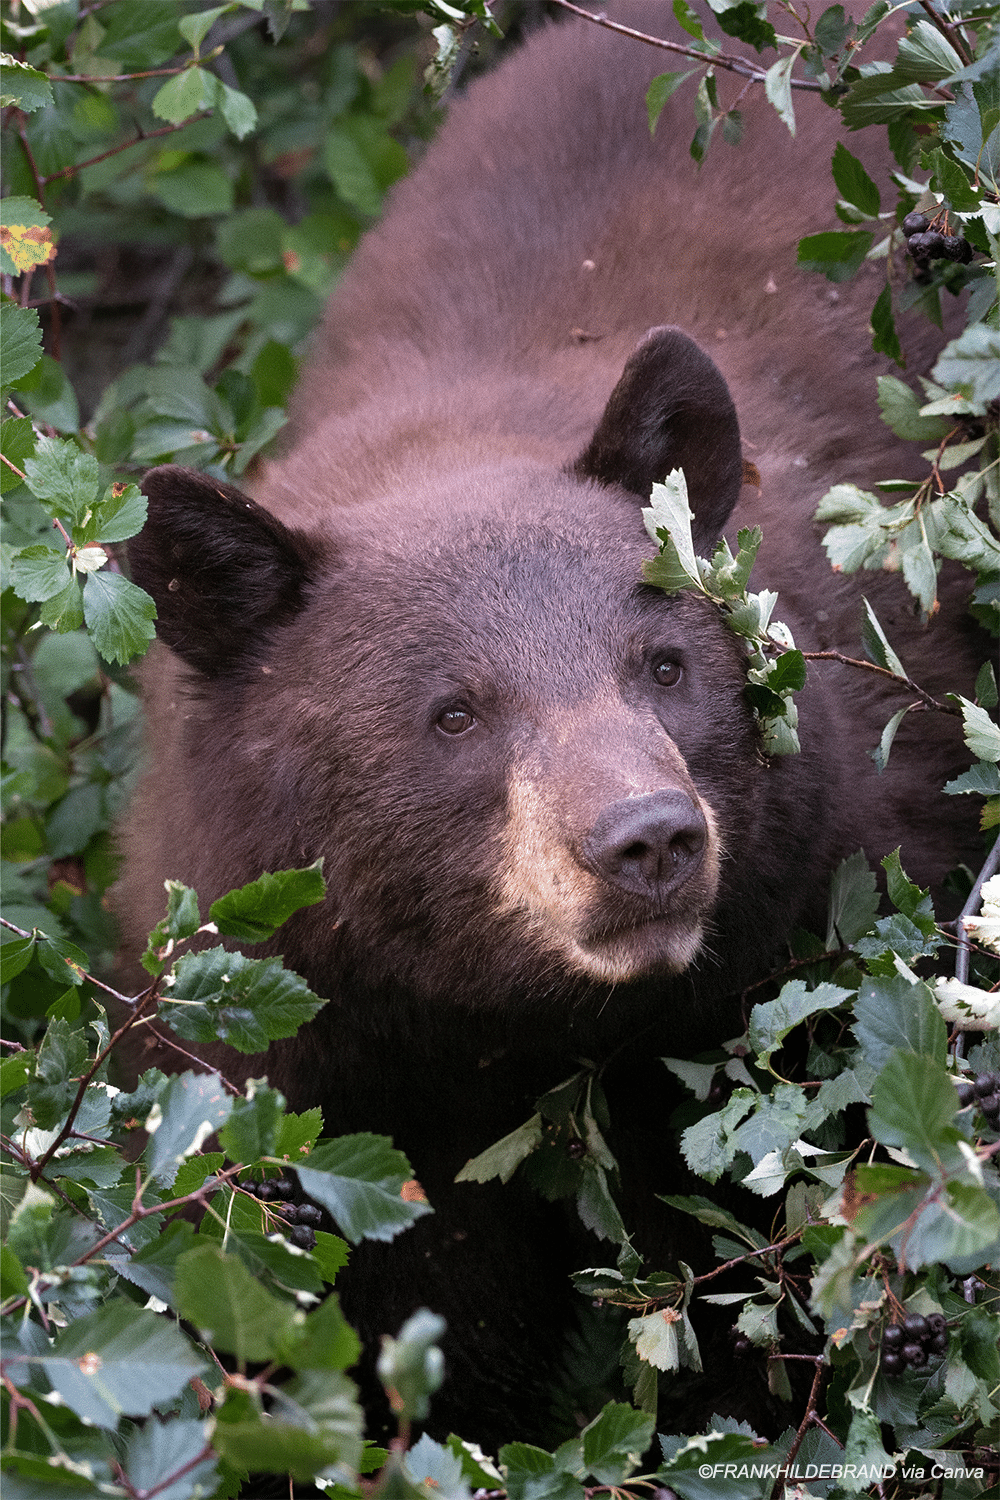 vertical photo of a black bear in the middle of some green foliage